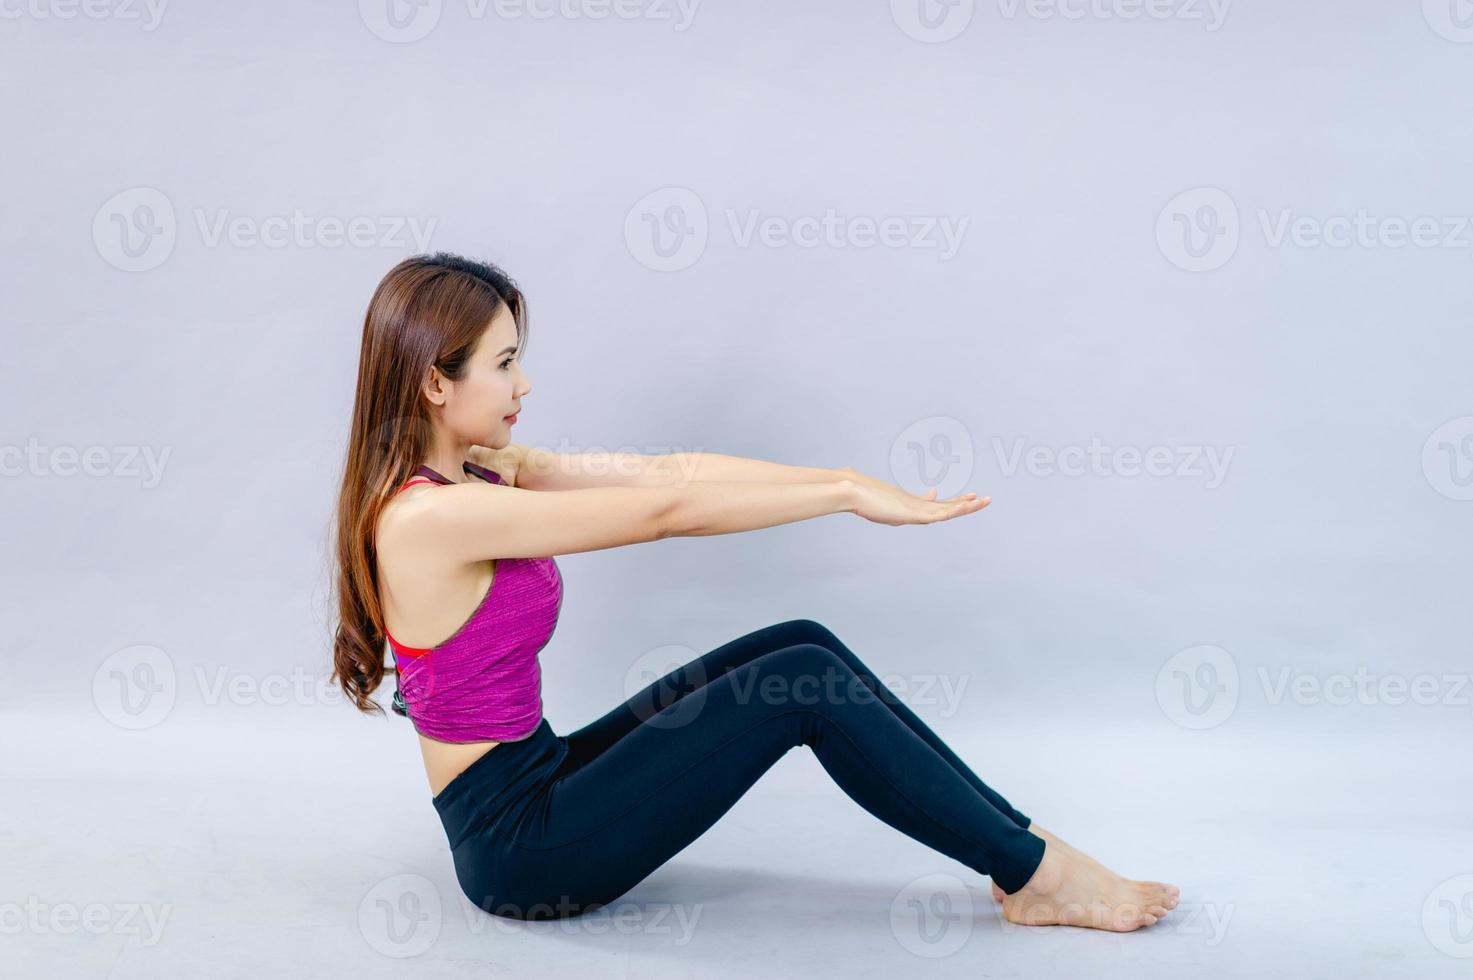 Women doing yoga for health Exercise in the room Concept of health care and good shape photo